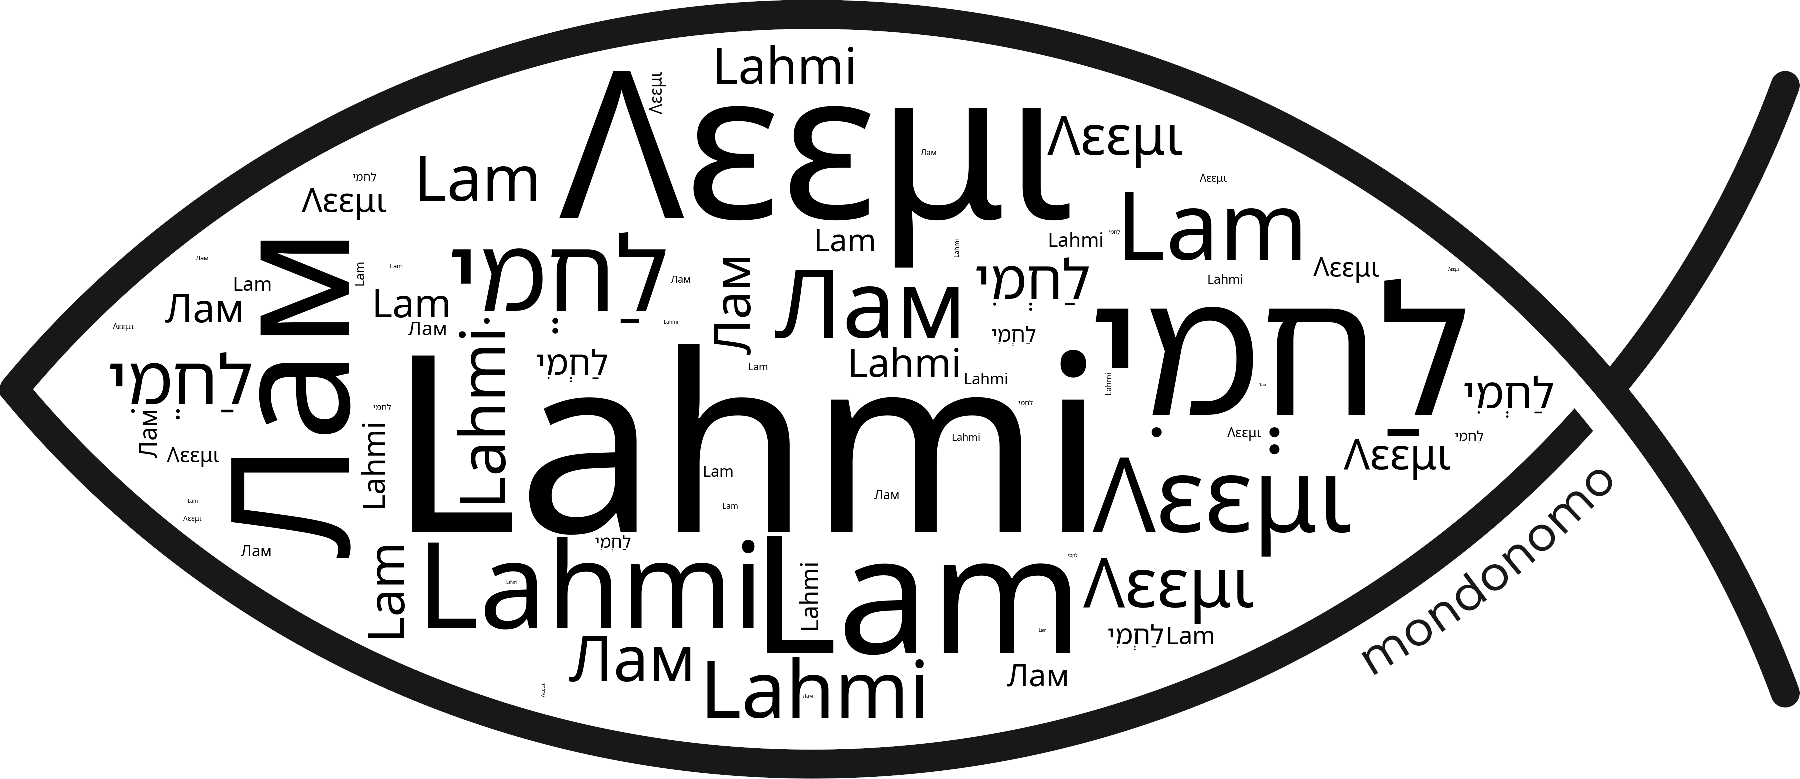 Name Lahmi in the world's Bibles